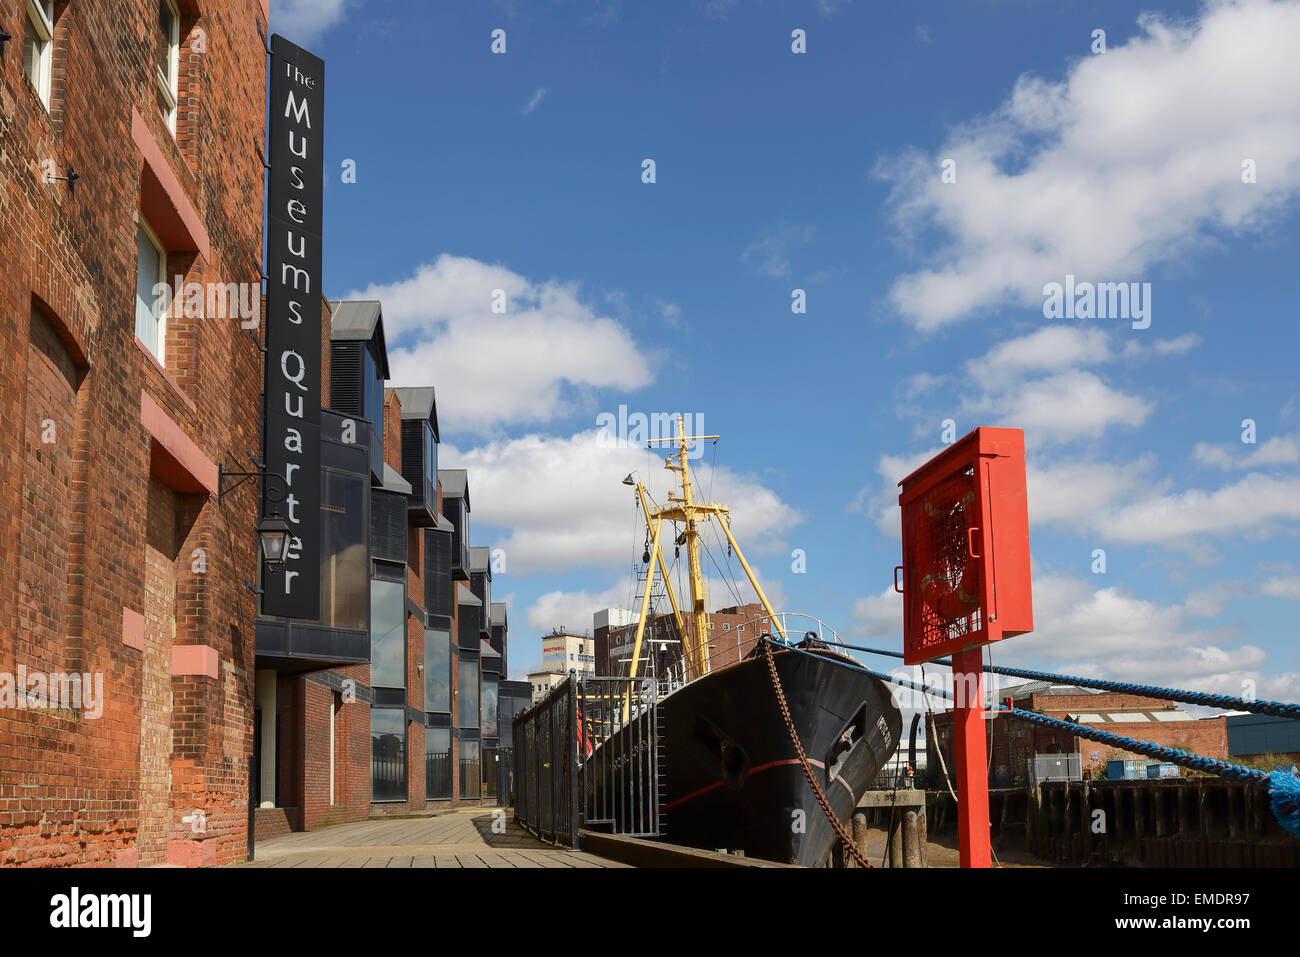 The Arctic Corsair ship on the RIver Hull in the Museum Quarter of Hull city centre UK Stock Photo